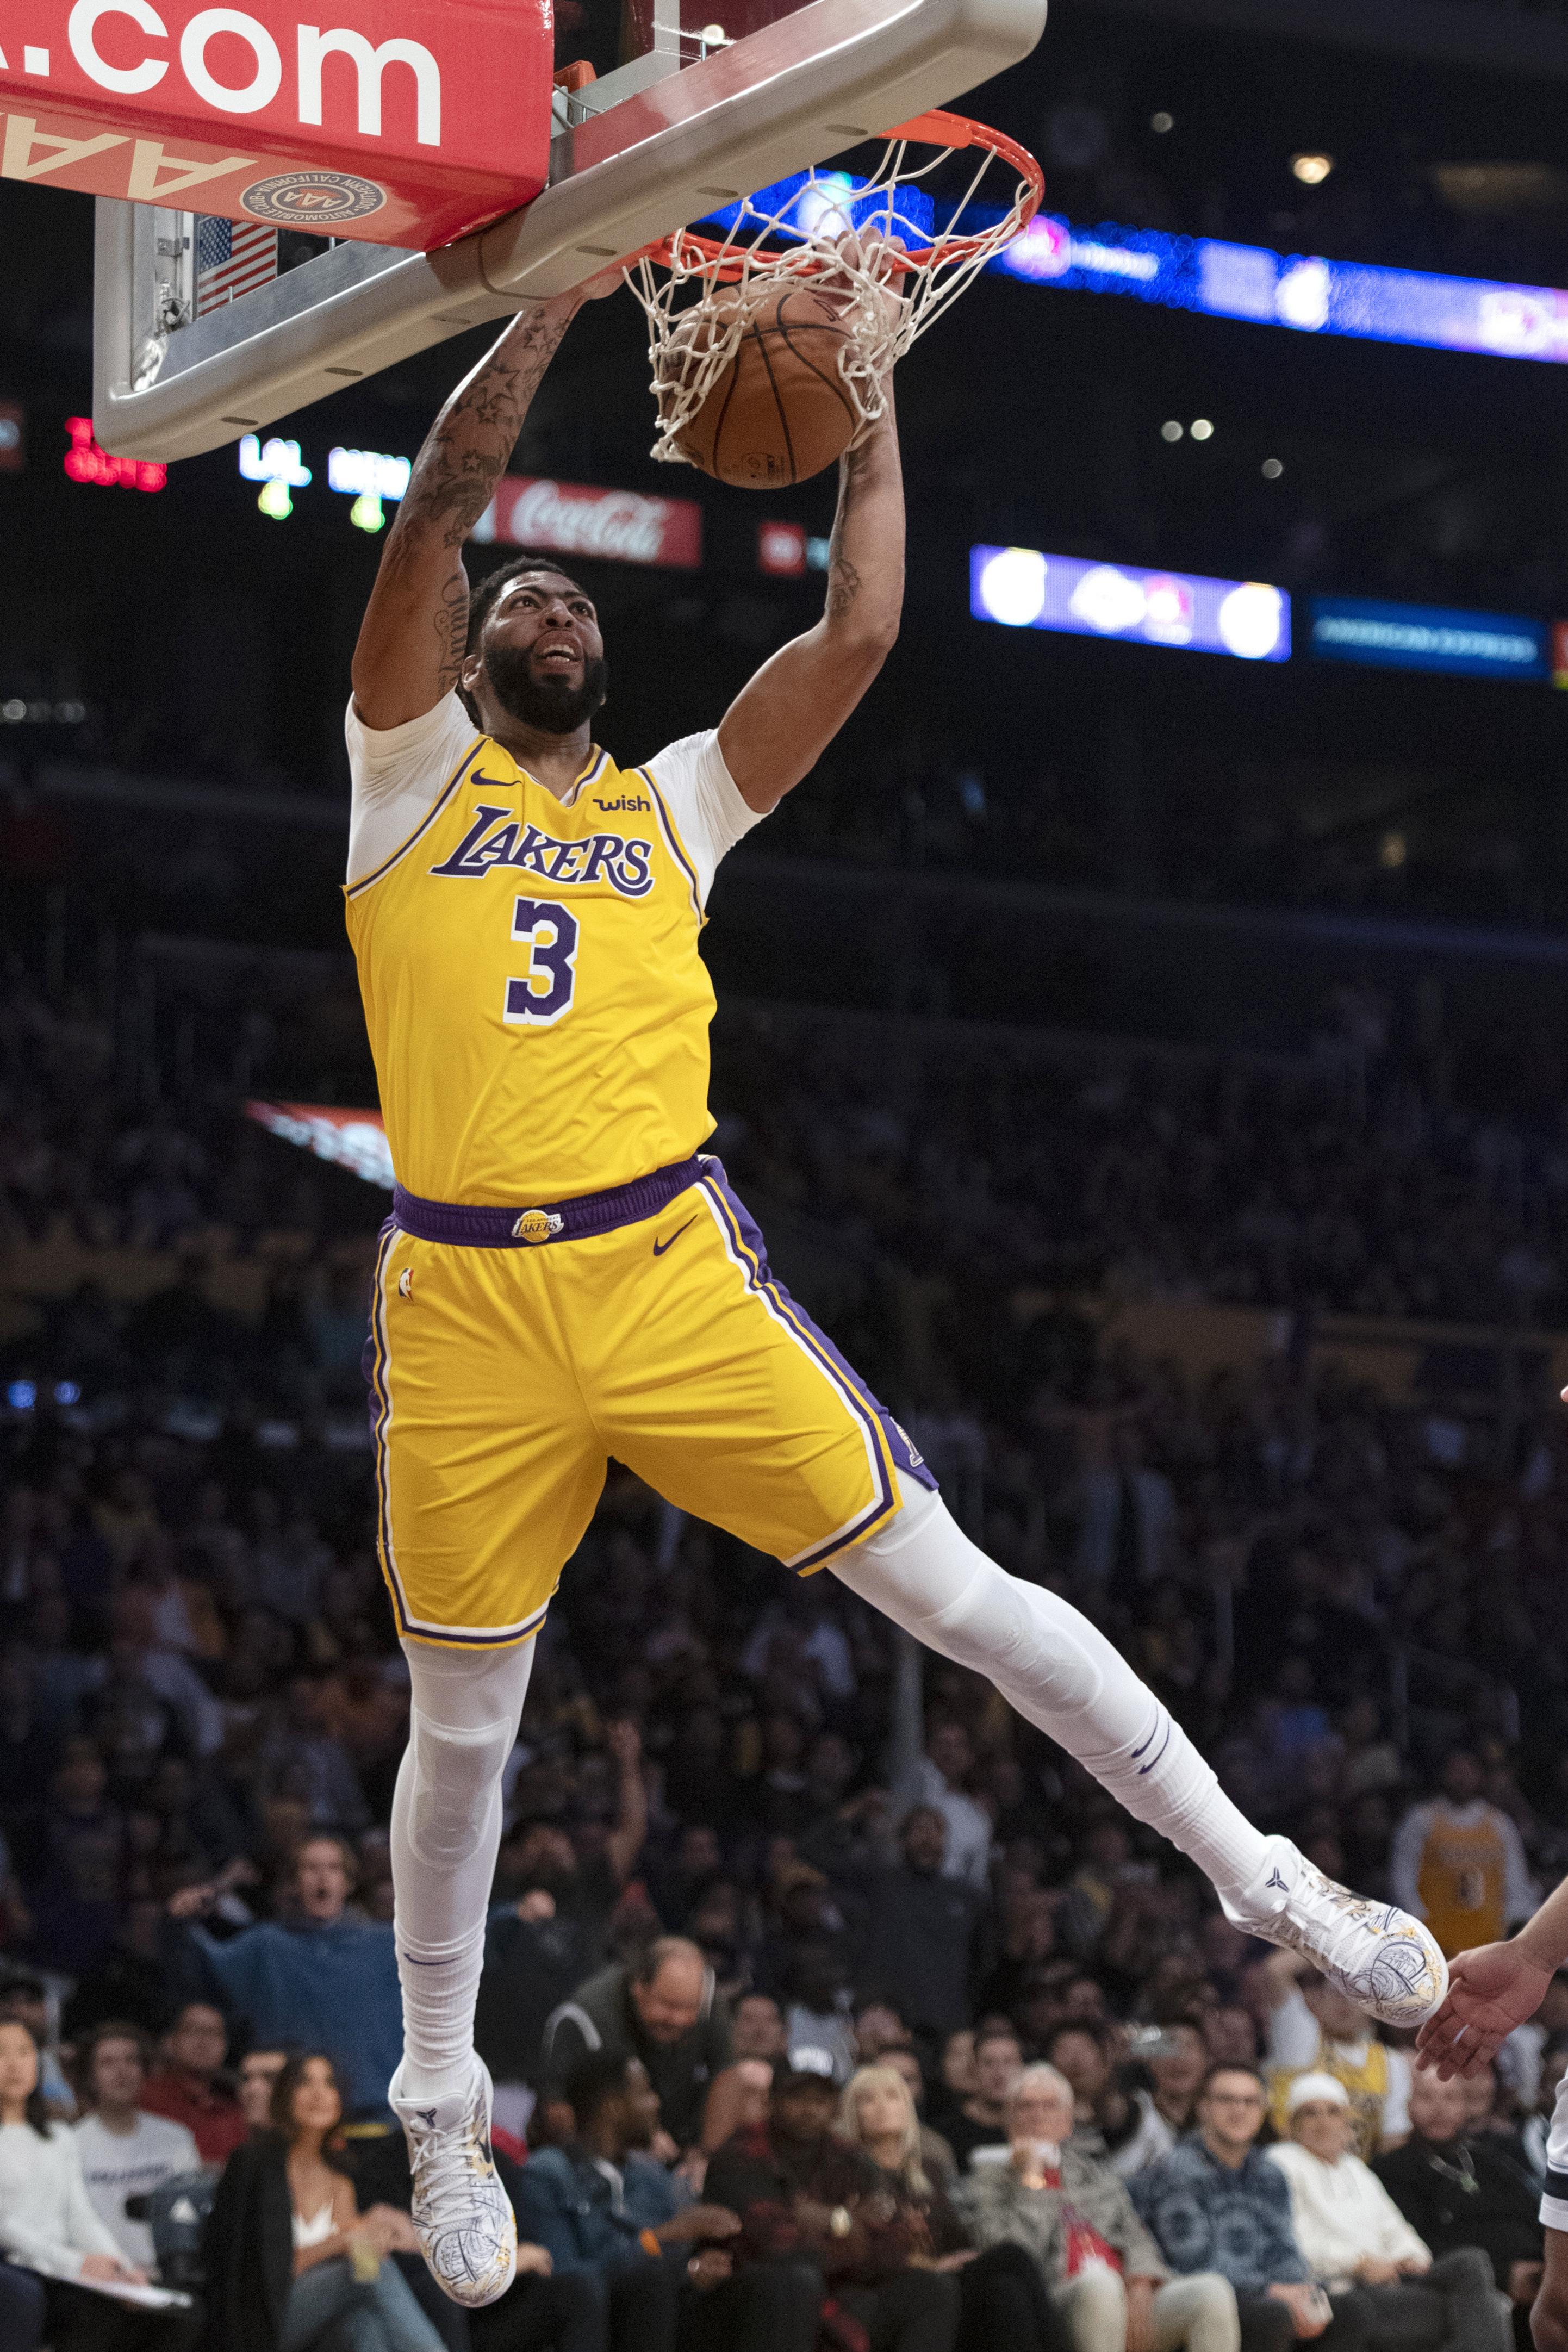 NBA roundup: Anthony Davis scores 40, hitting 26 FTs, as Lakers rout